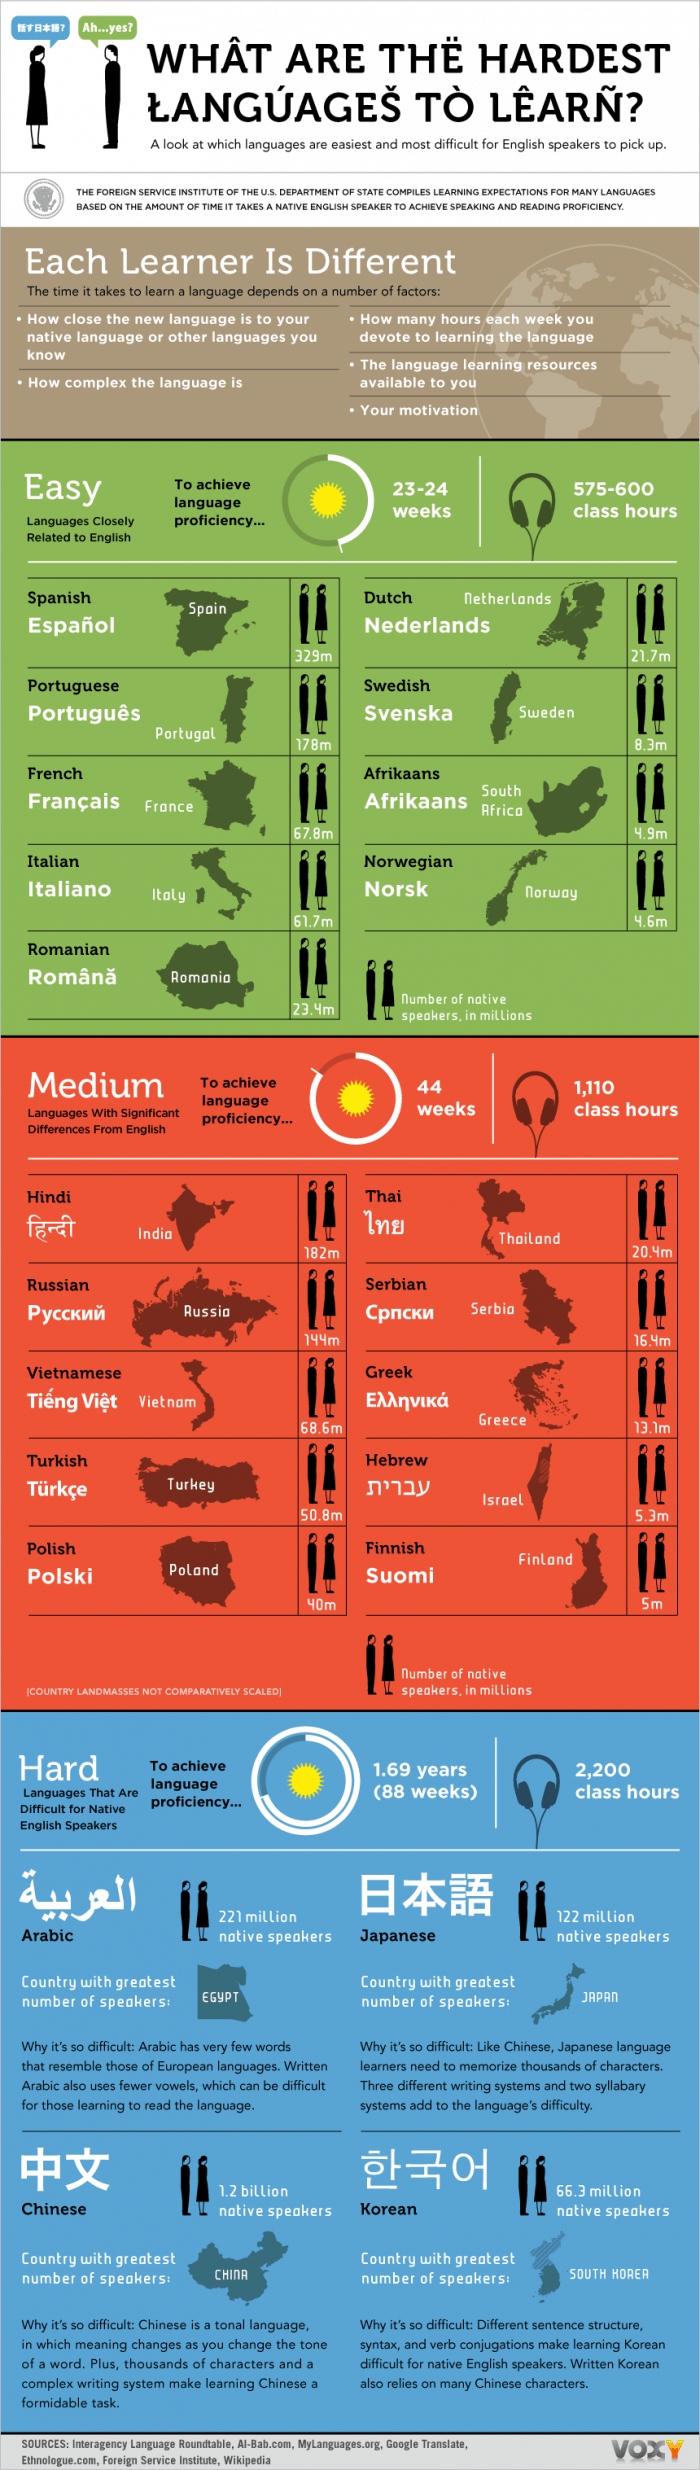 What Are The Hardest Languages to Learn? [Infographic] | Daily Infographic